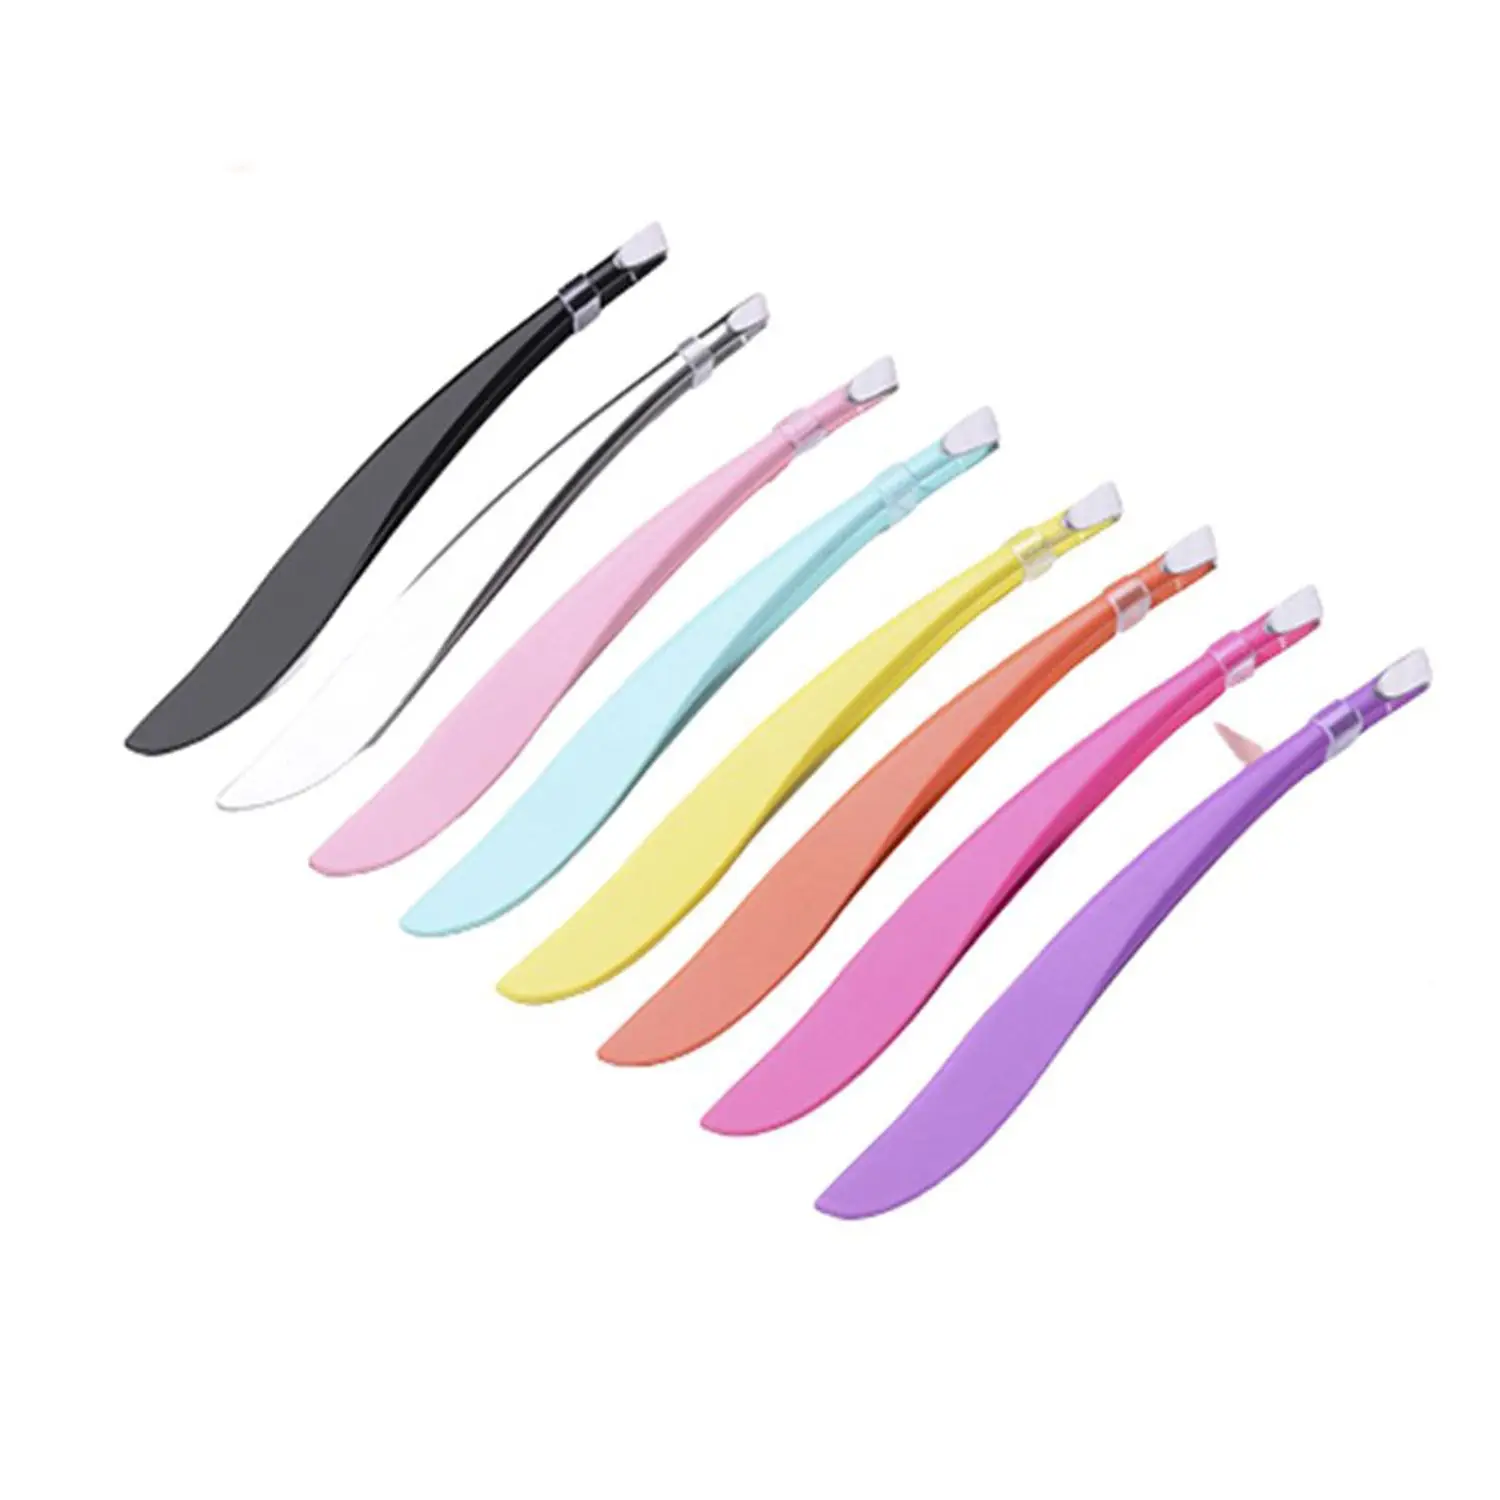 

7PCS New Beauty Eye Brow Trimmer Stainless Steel Slanted Puller Eyelashes Hair Removal Eyebrow Tweezers